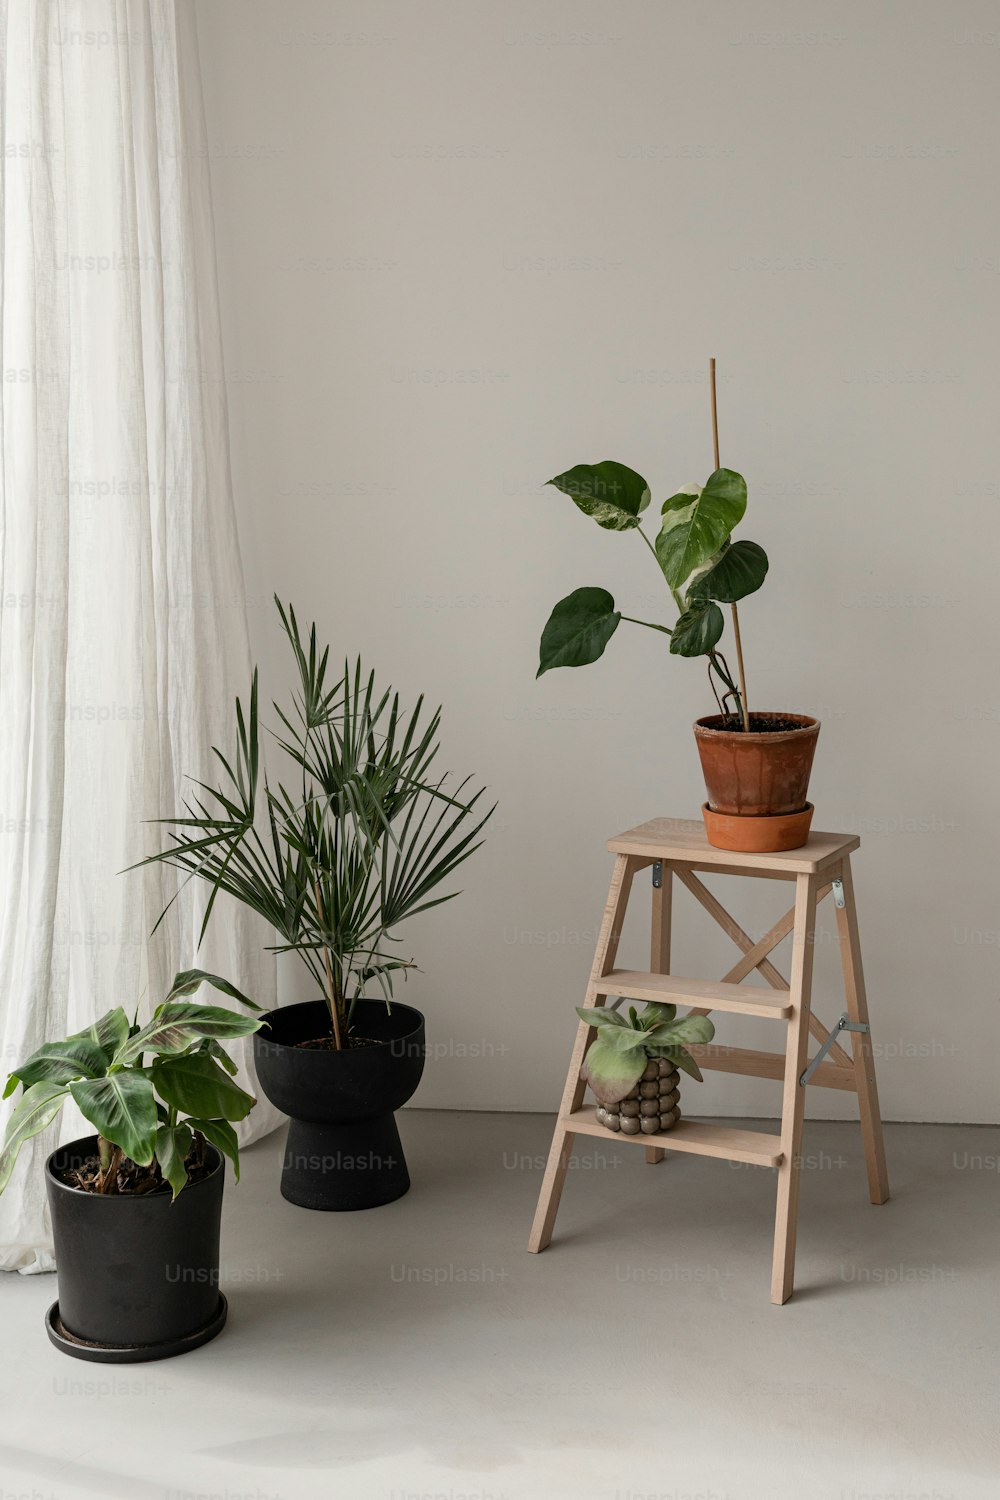 three potted plants sitting on top of a wooden stool